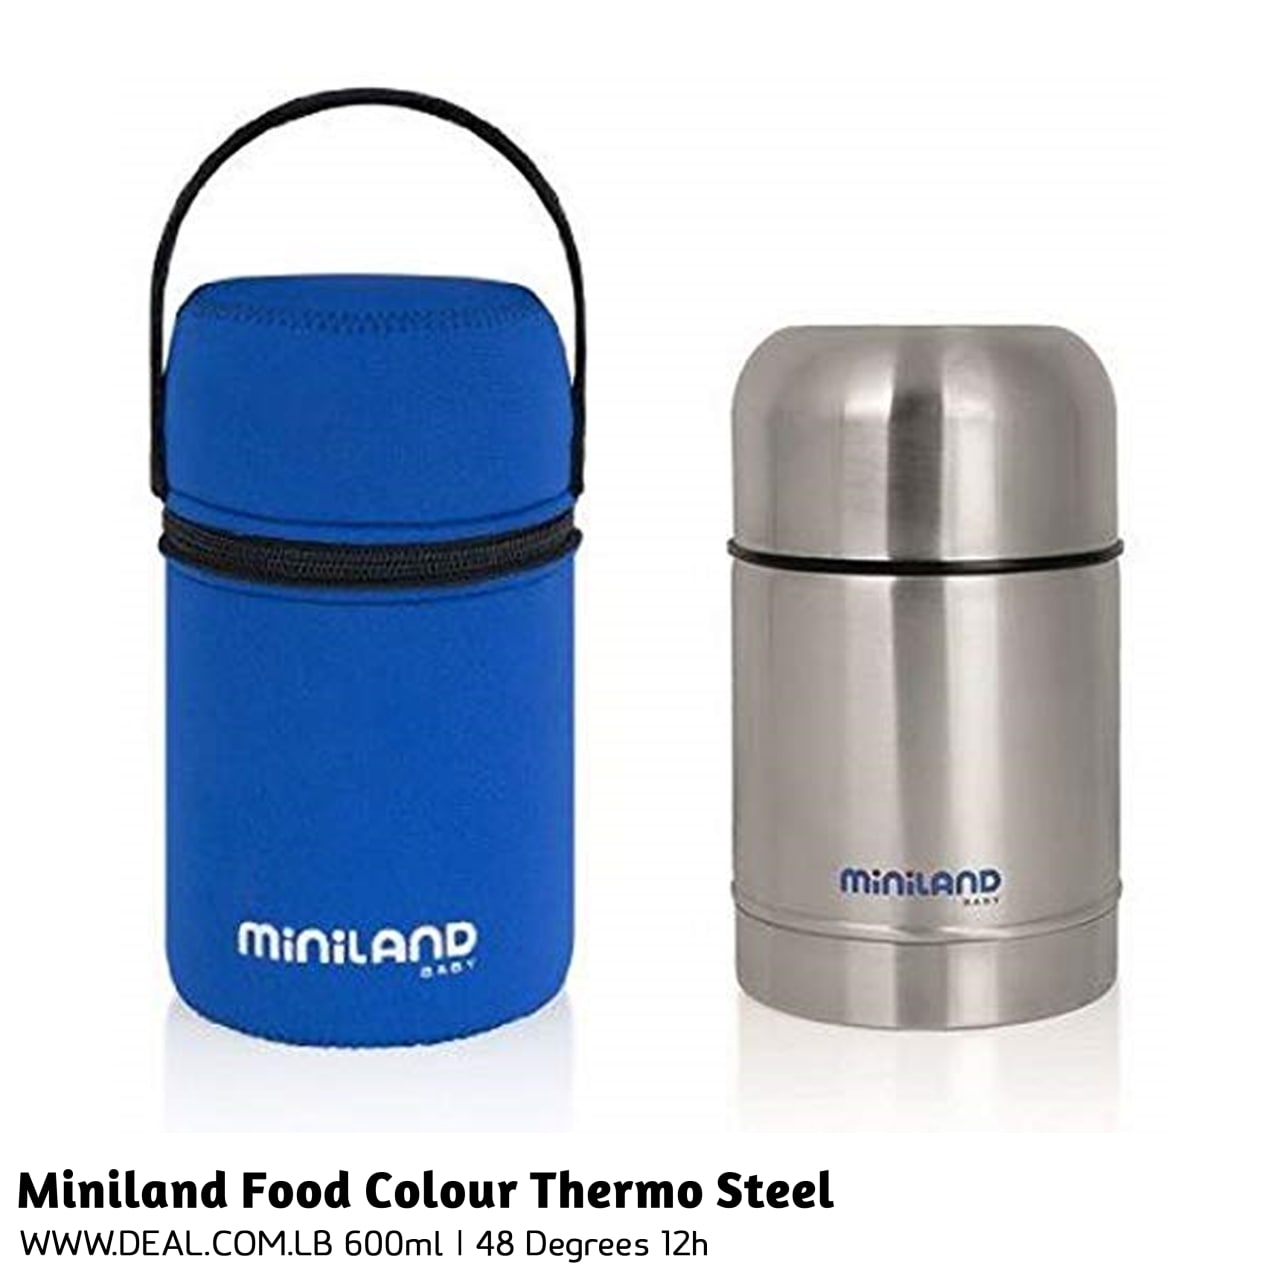 Miniland Food Color Thermo Steel